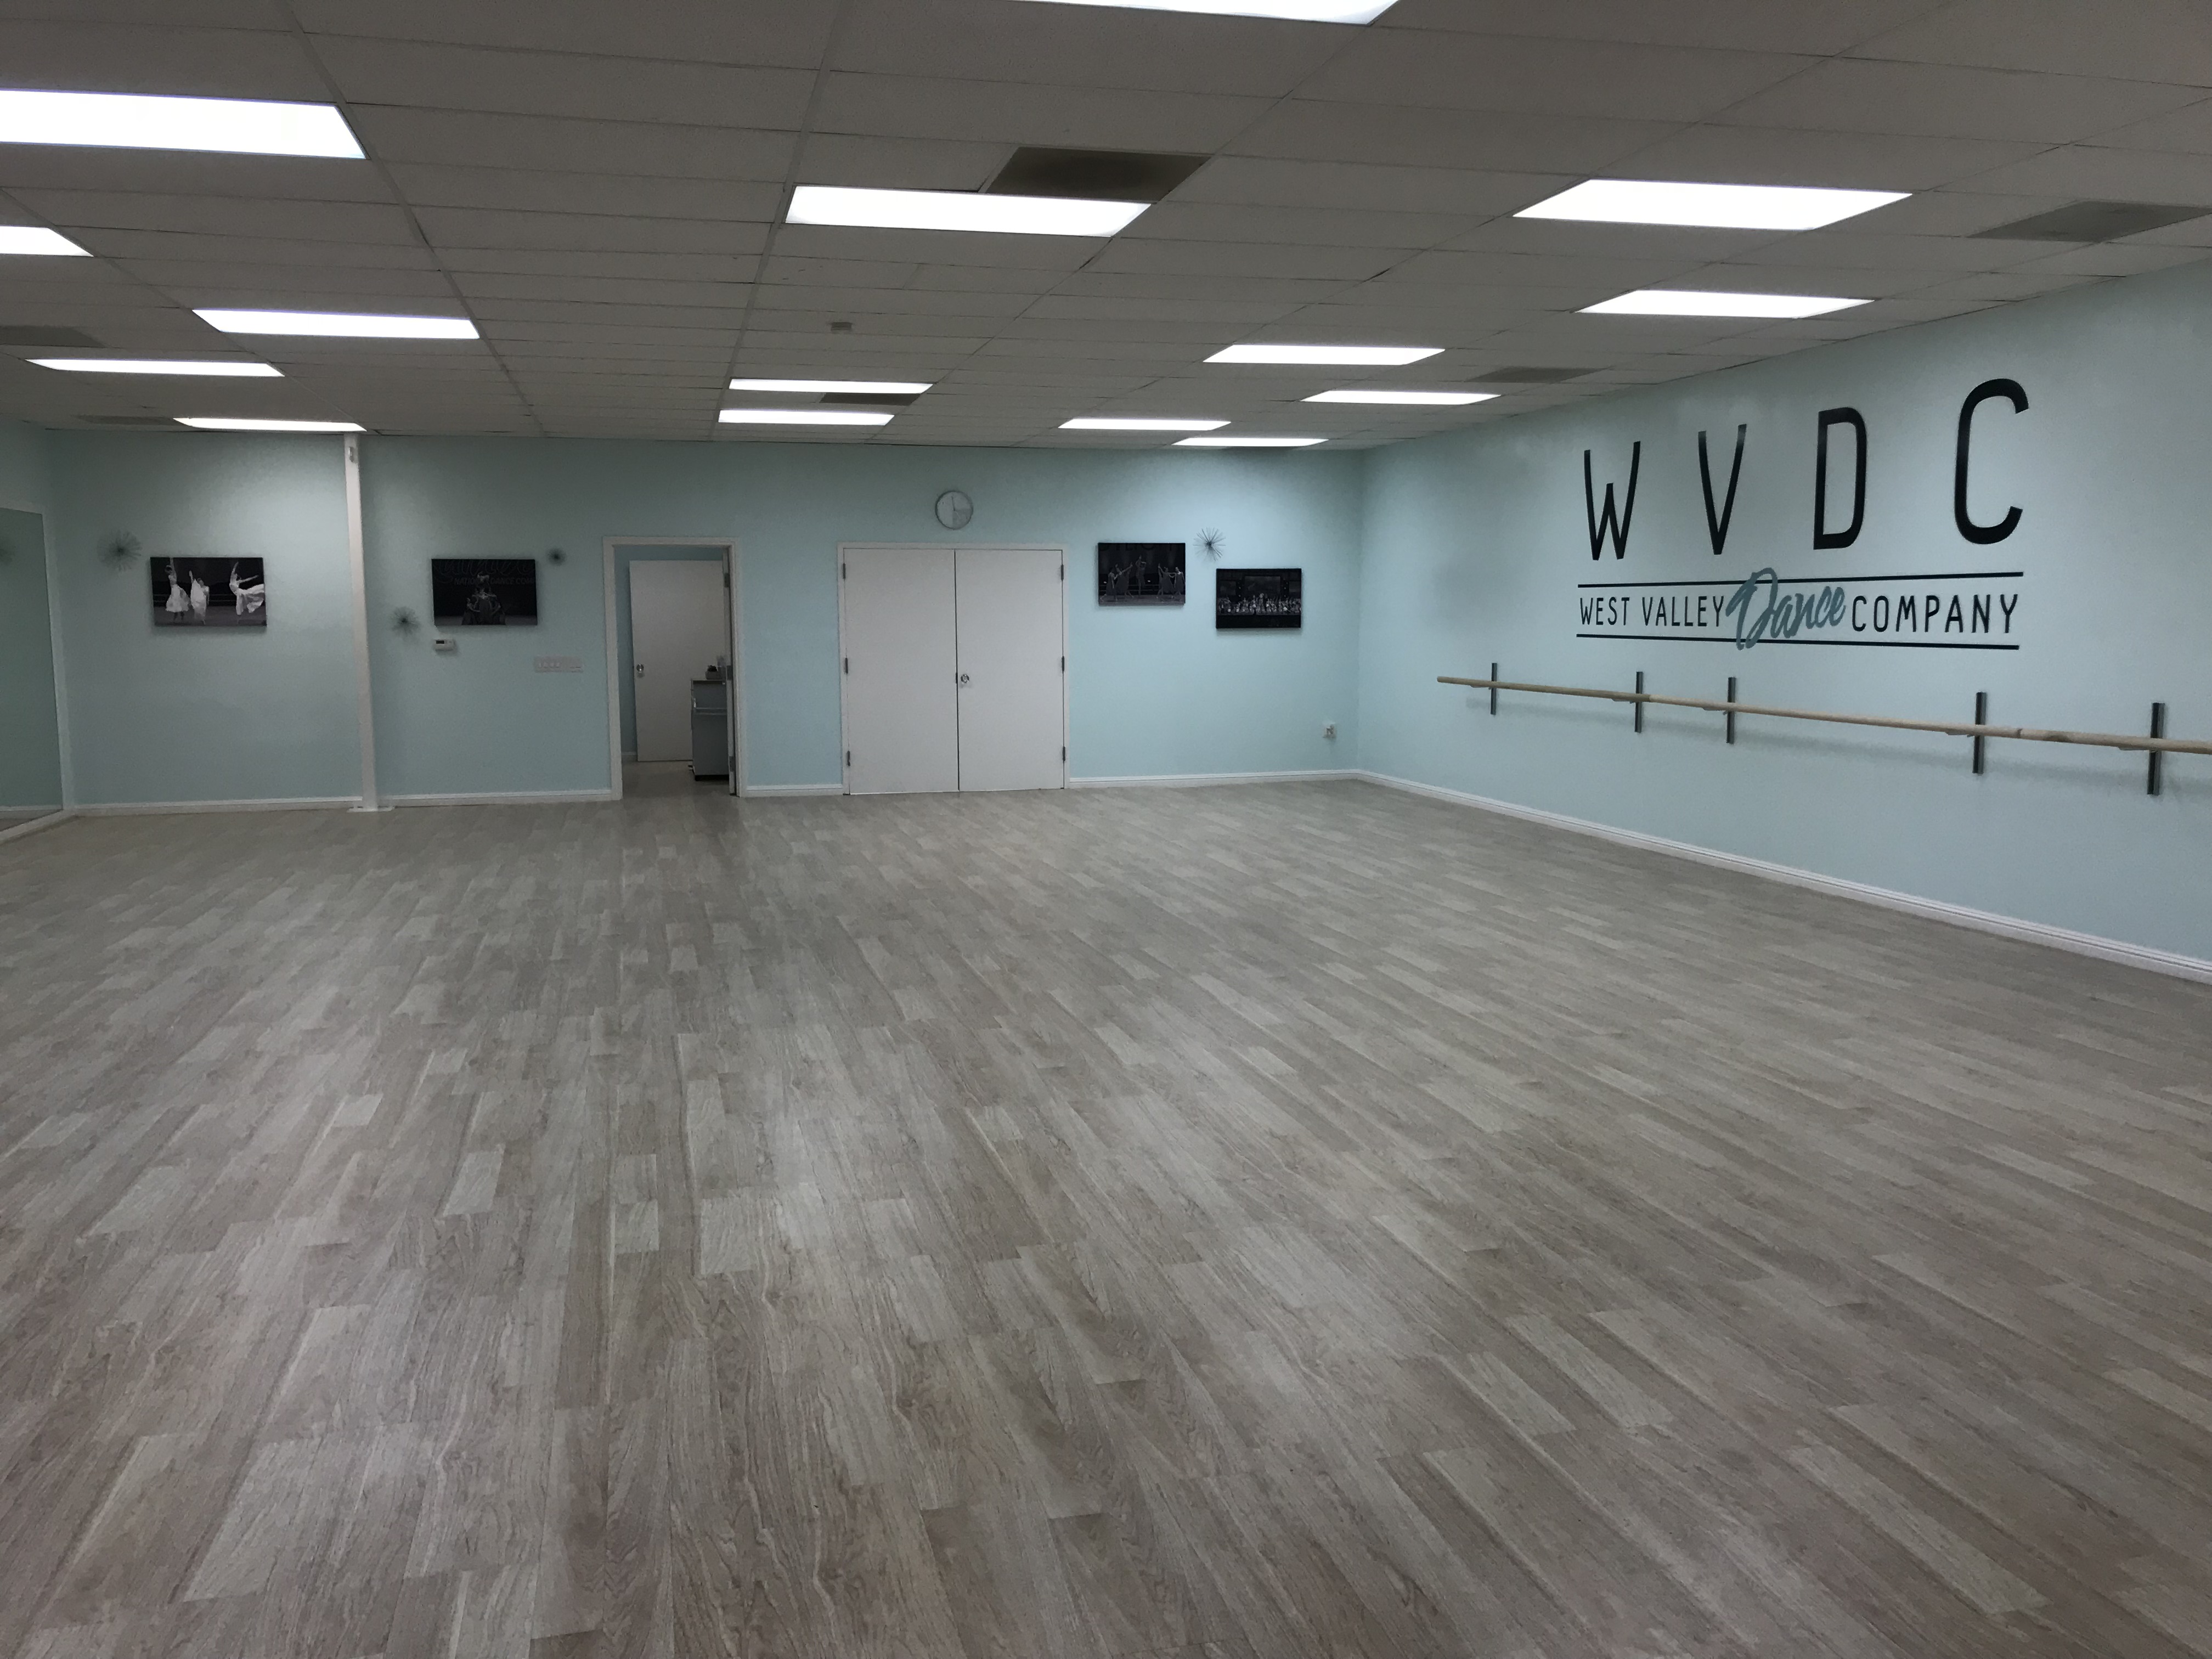 One of our rooms in West Valley Dance Studio